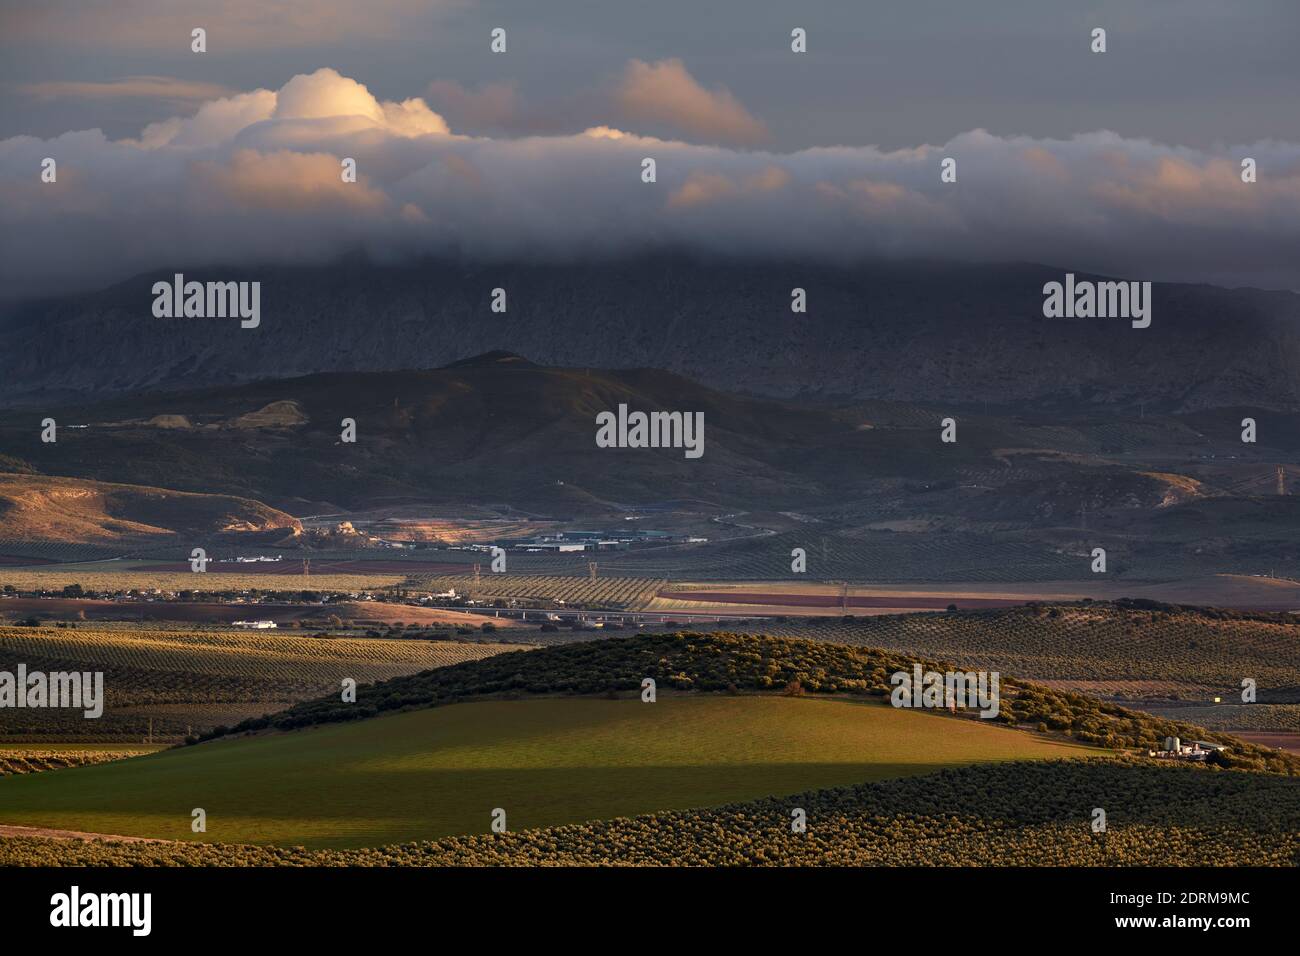 views of the fertile plain of and Torcal de Antequera in Malaga. Andalusia, Spain Stock Photo